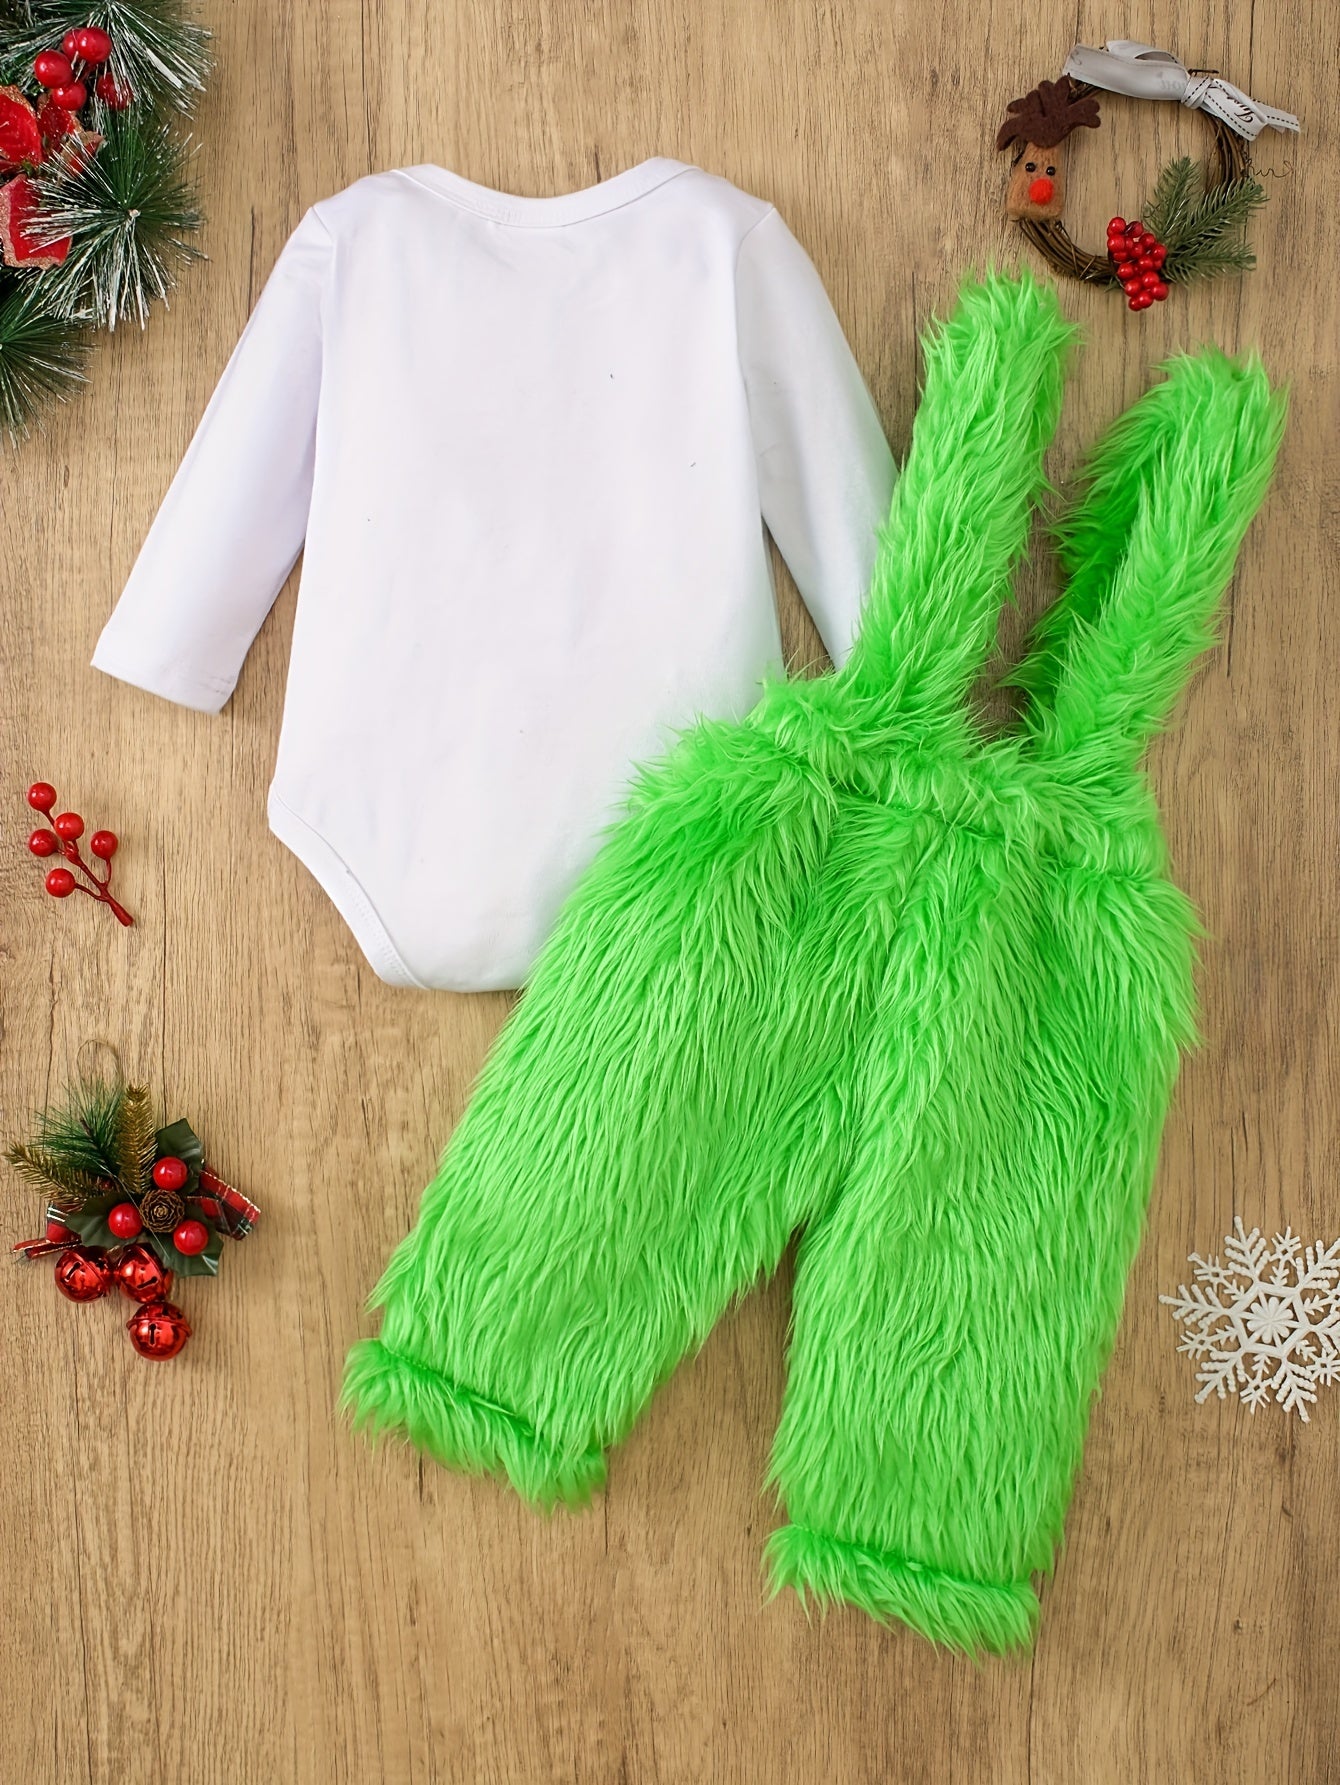 Christmas Baby Adorable Outfits - Letter Print Long Sleeve Round Neck Romper & Furry Green Pants Set, Kid's Party Casual Clothes